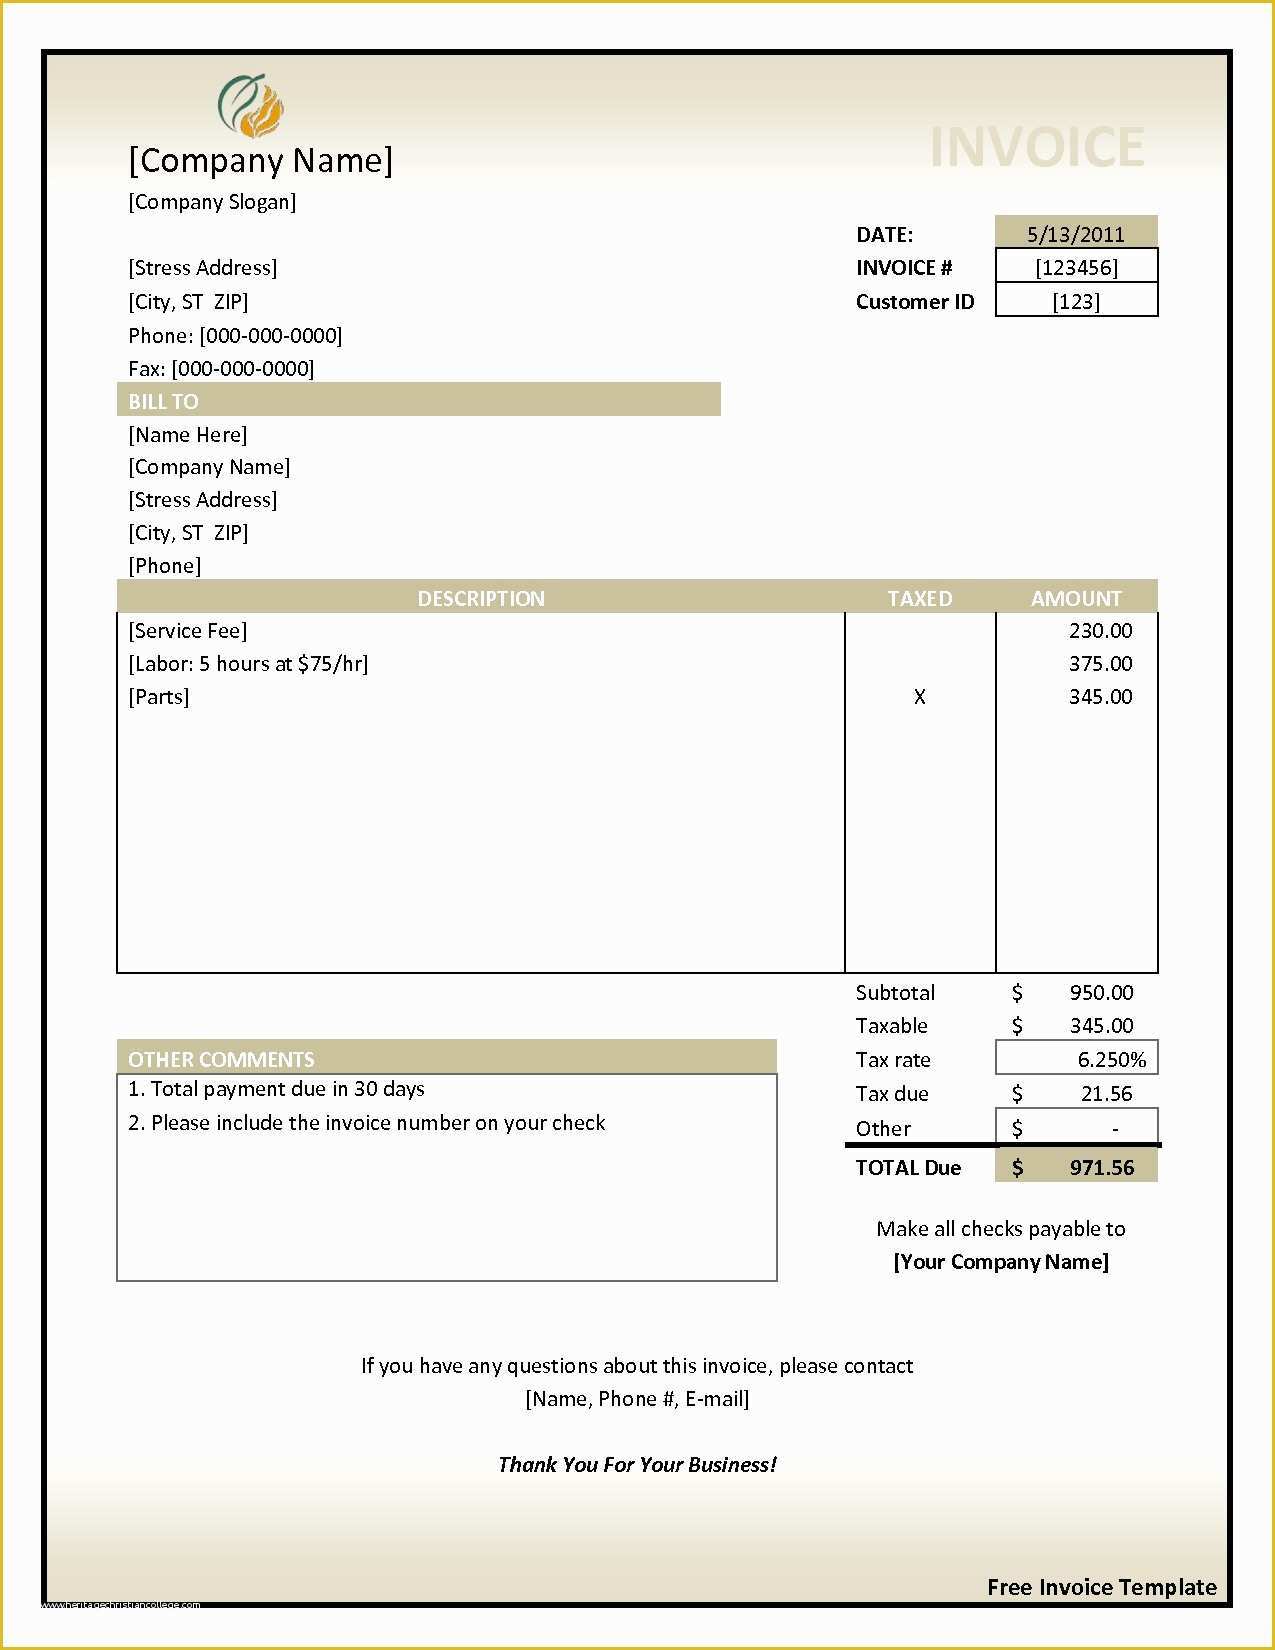 Free Online Invoice Template Of Invoices Samples Free Invoice Template Ideas